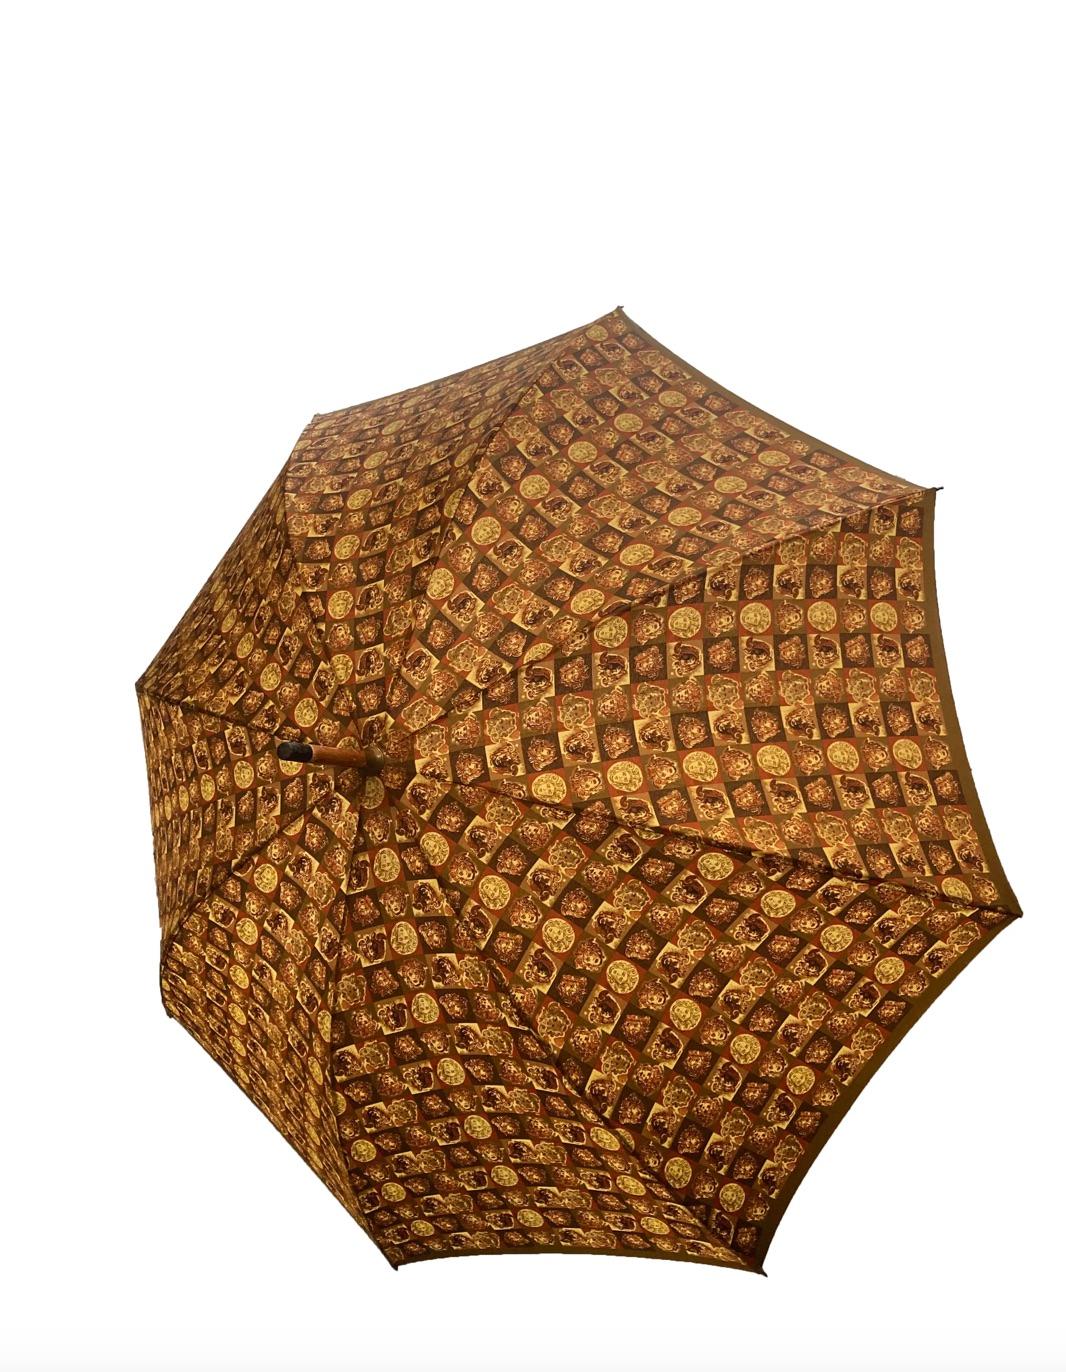 Vintage Gianni Versace umbrella from the eponymous brand. Golden brown toned wood shaft featuring a hooked wooden handle embellished with the signature cut out style medusa head logo surrounded by a Grecian style border in gold toned metal. Khaki